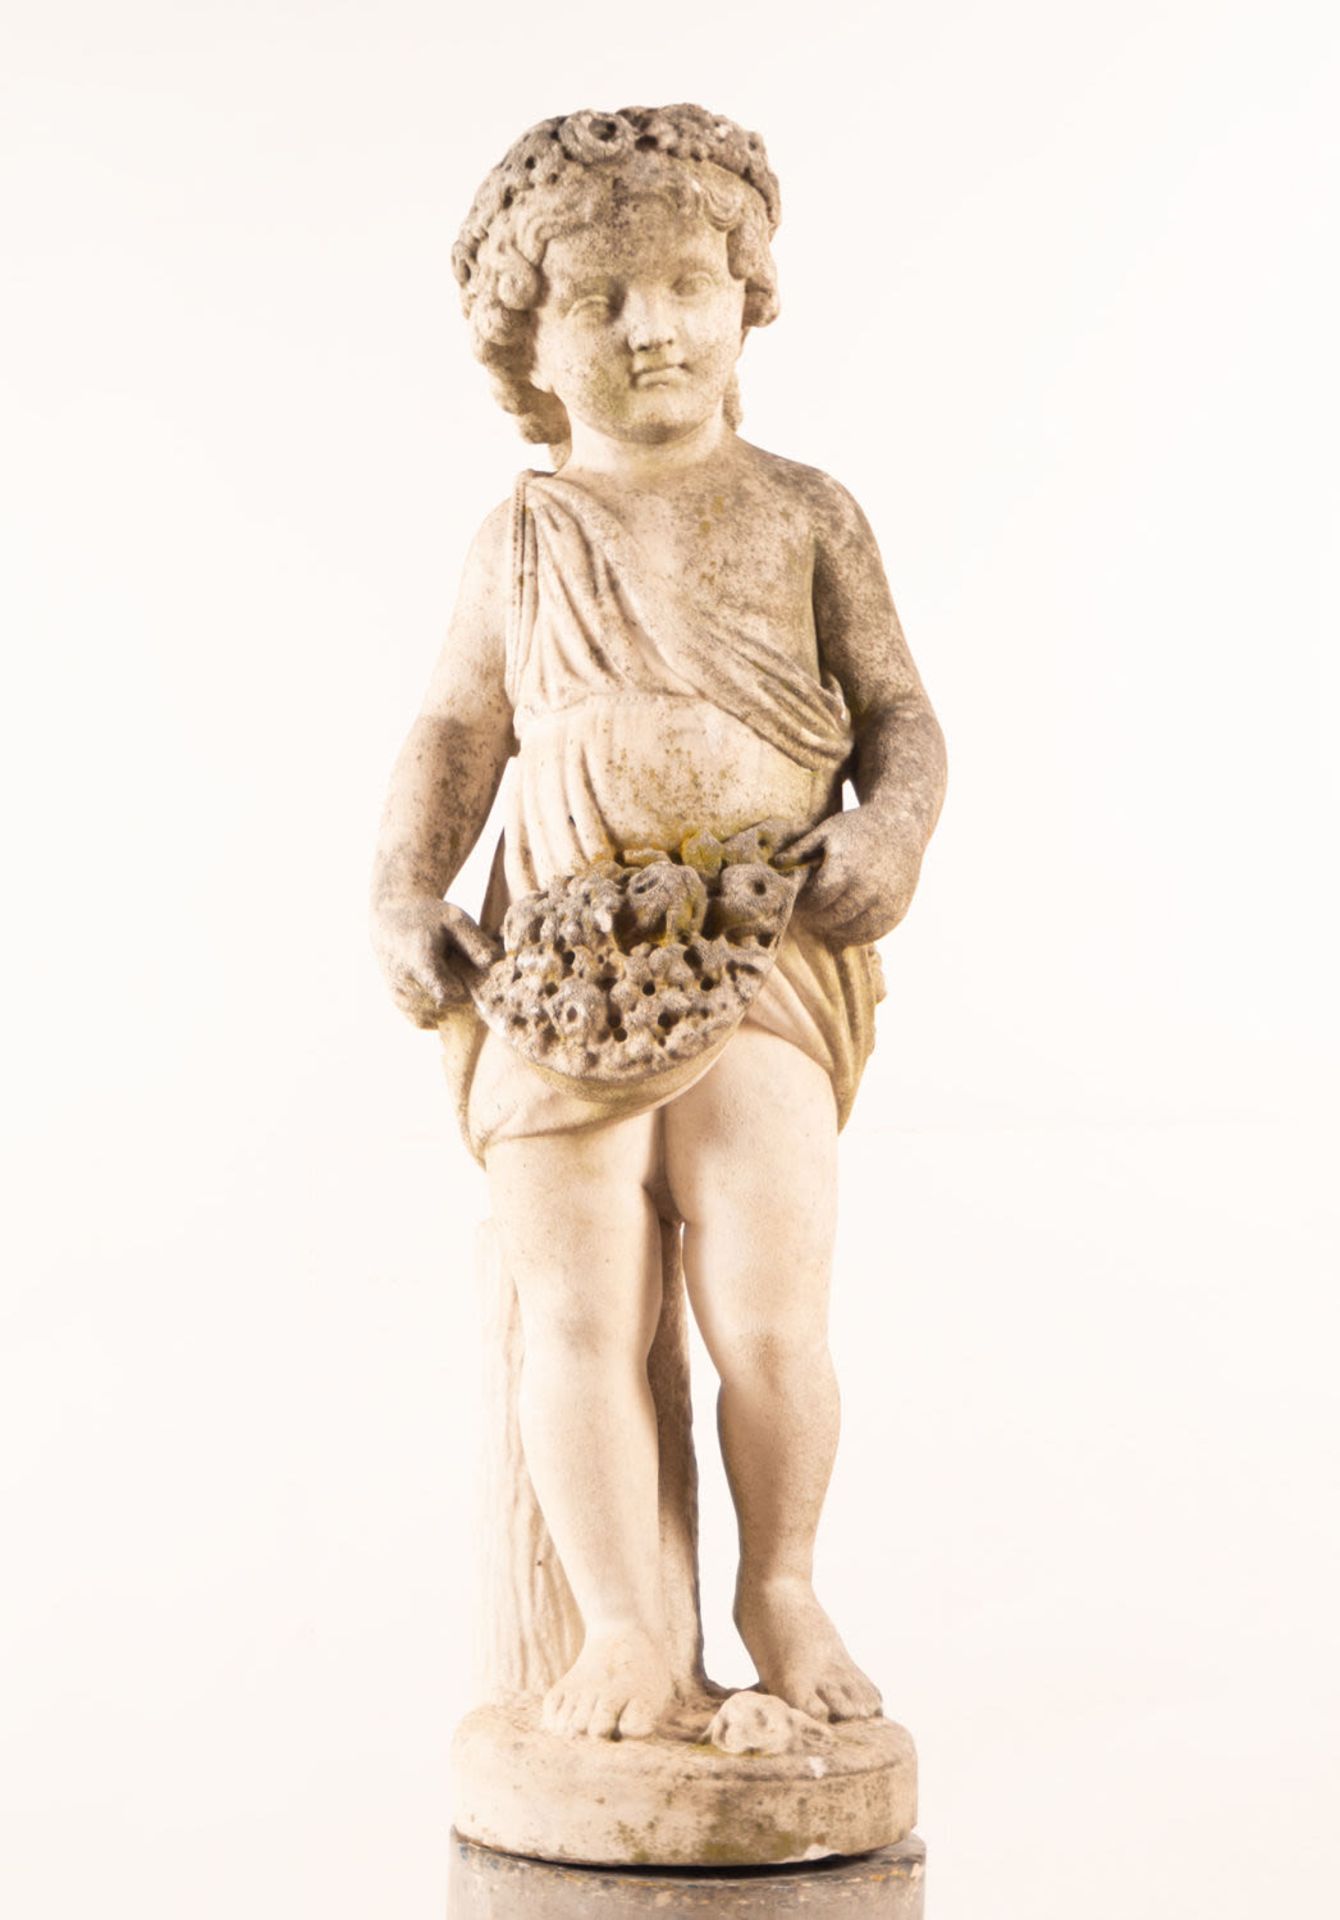 Large Cherub Figure in Marble, France, 18th century - Image 2 of 14